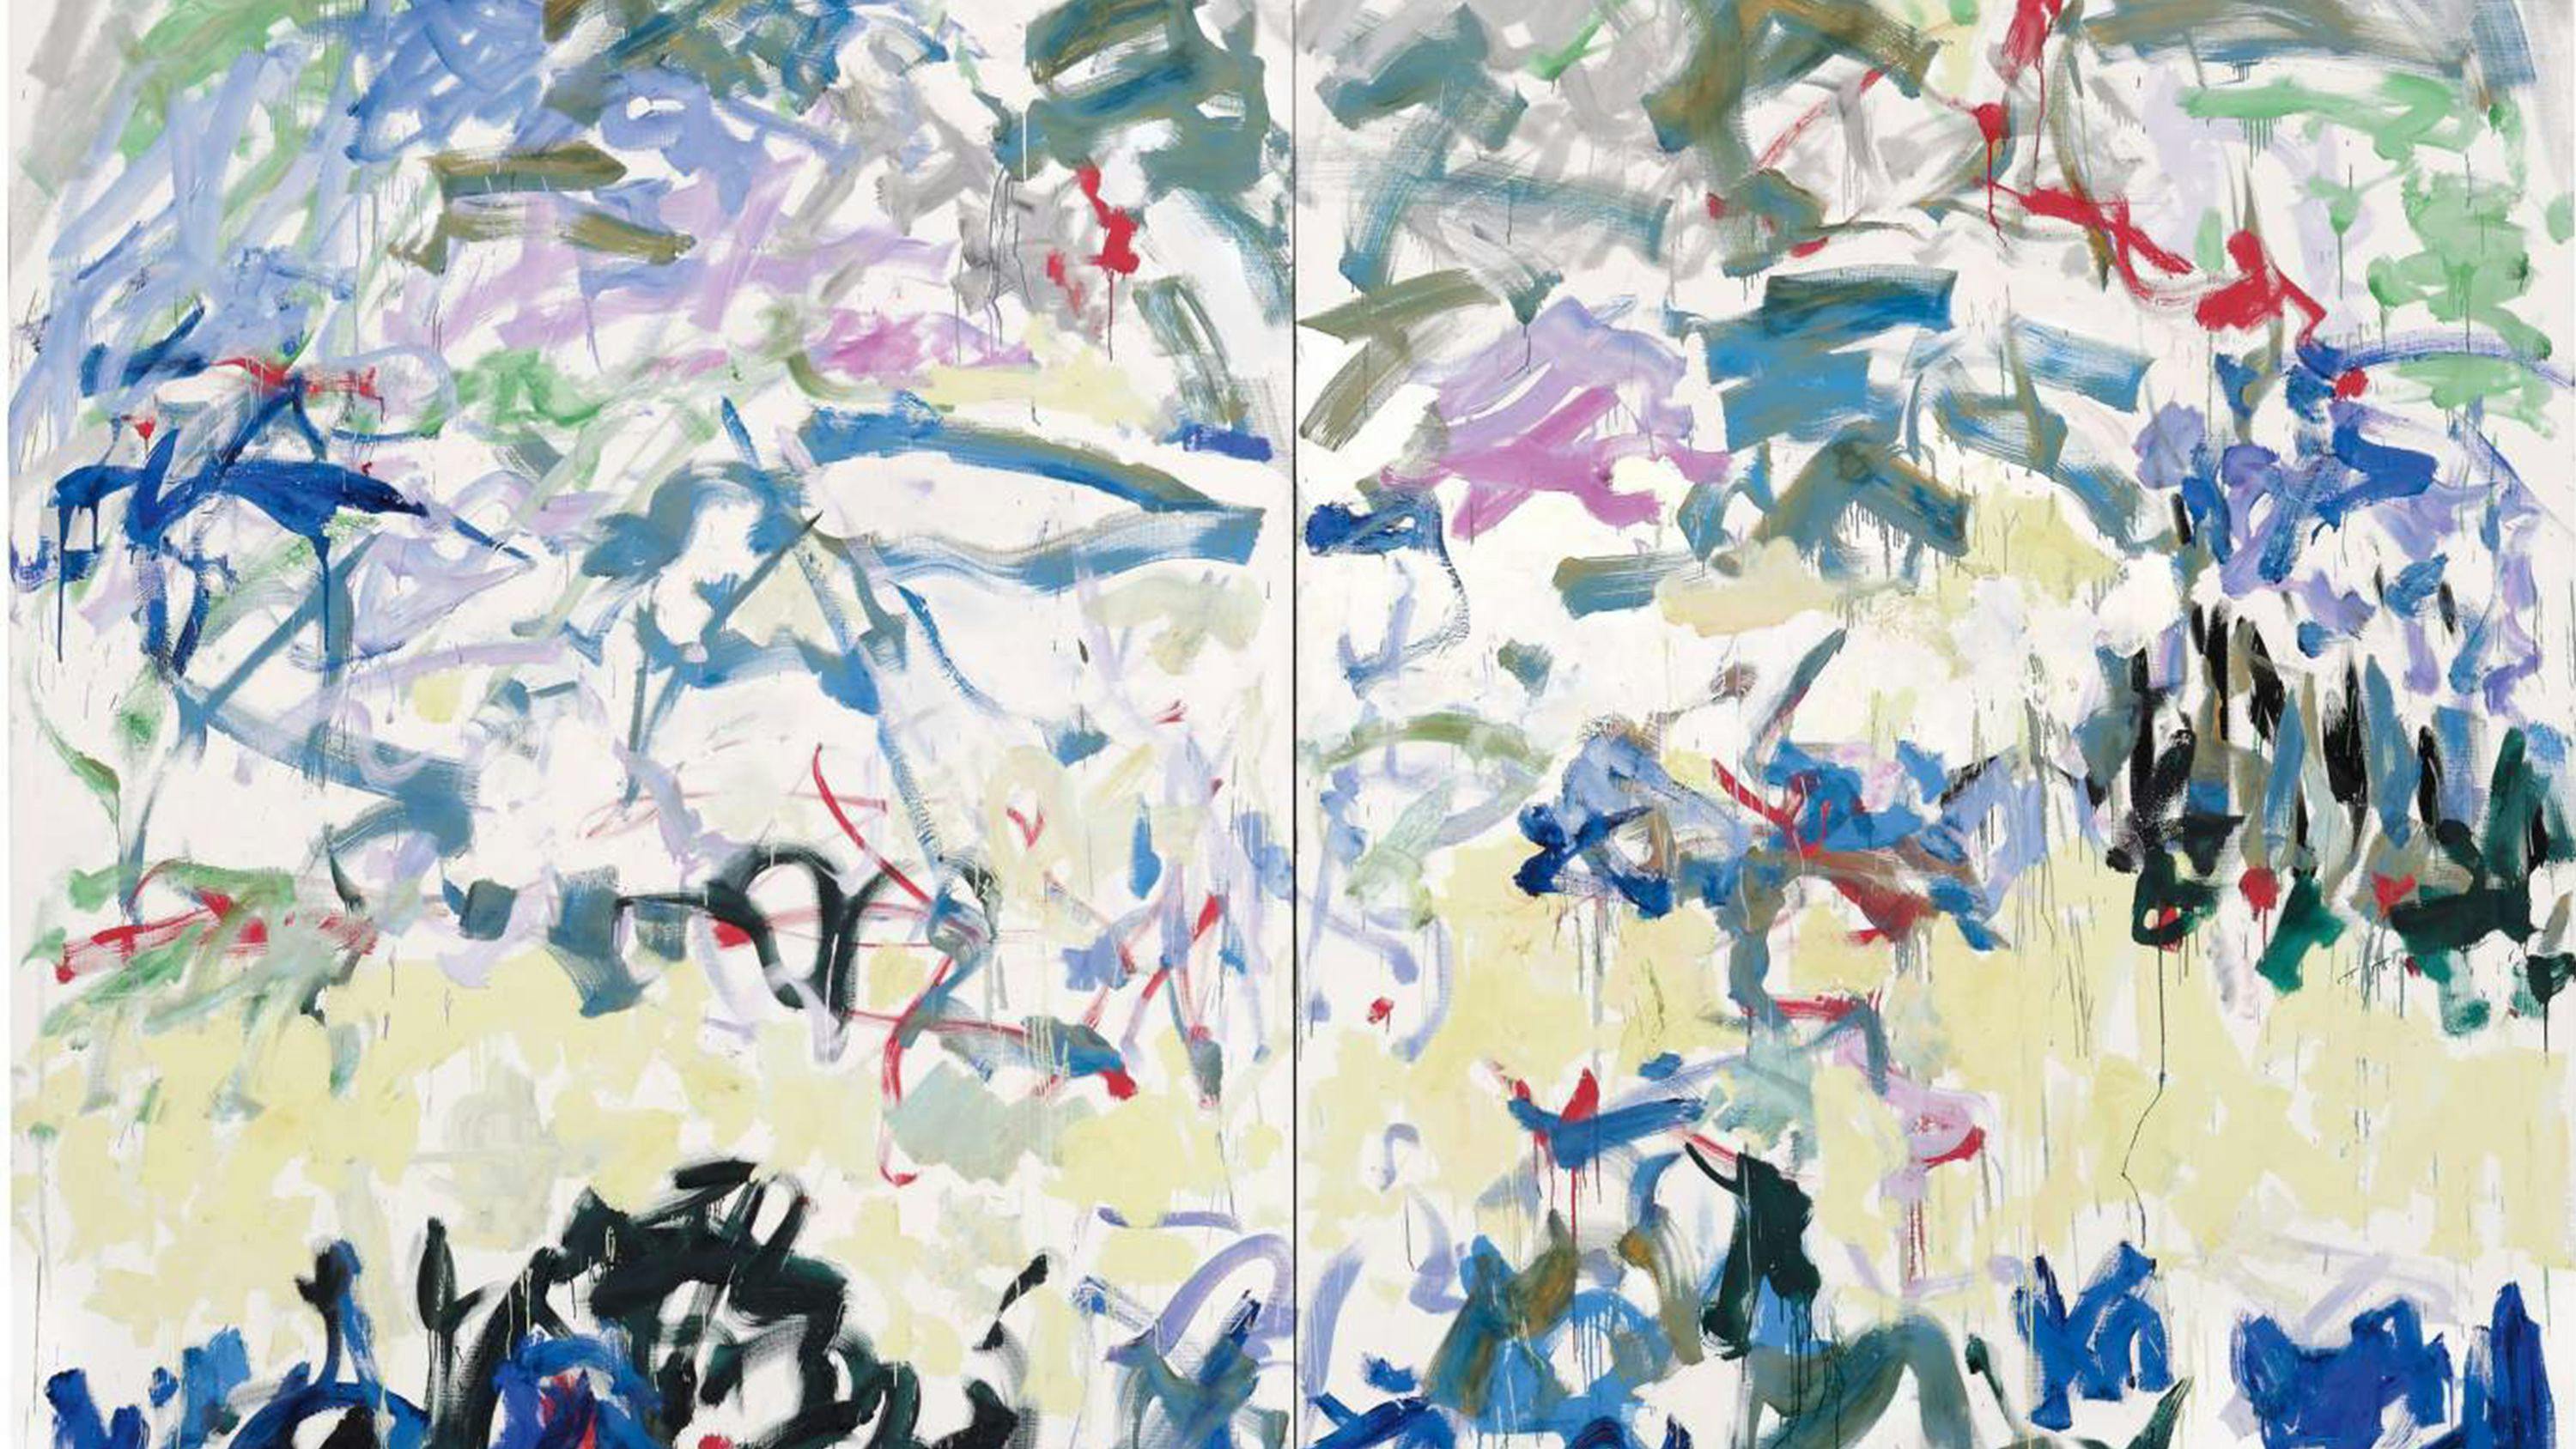 A detailed view of Joan Mitchell’s 1989 artwork, River